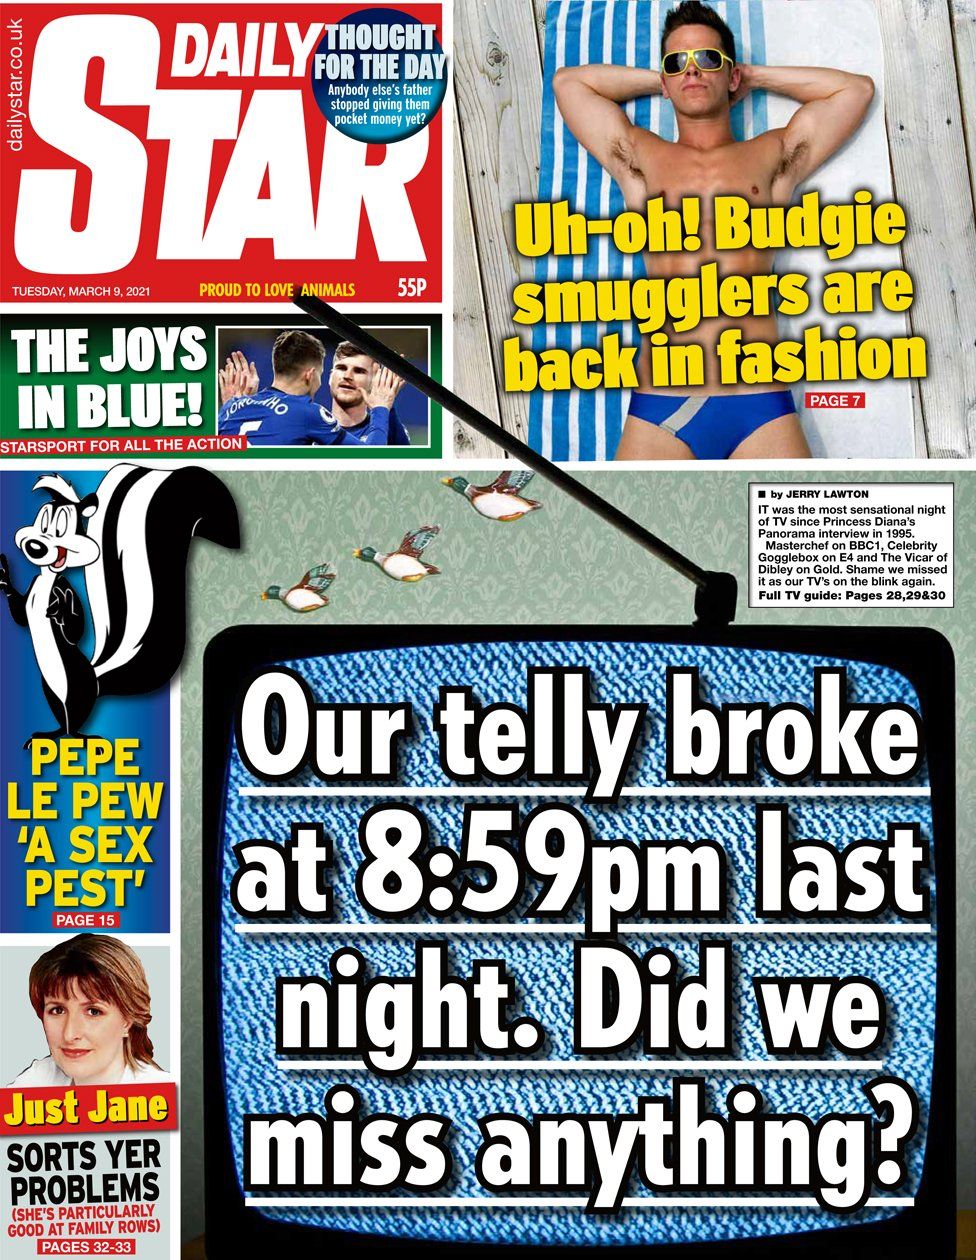 The Daily Star 9 March